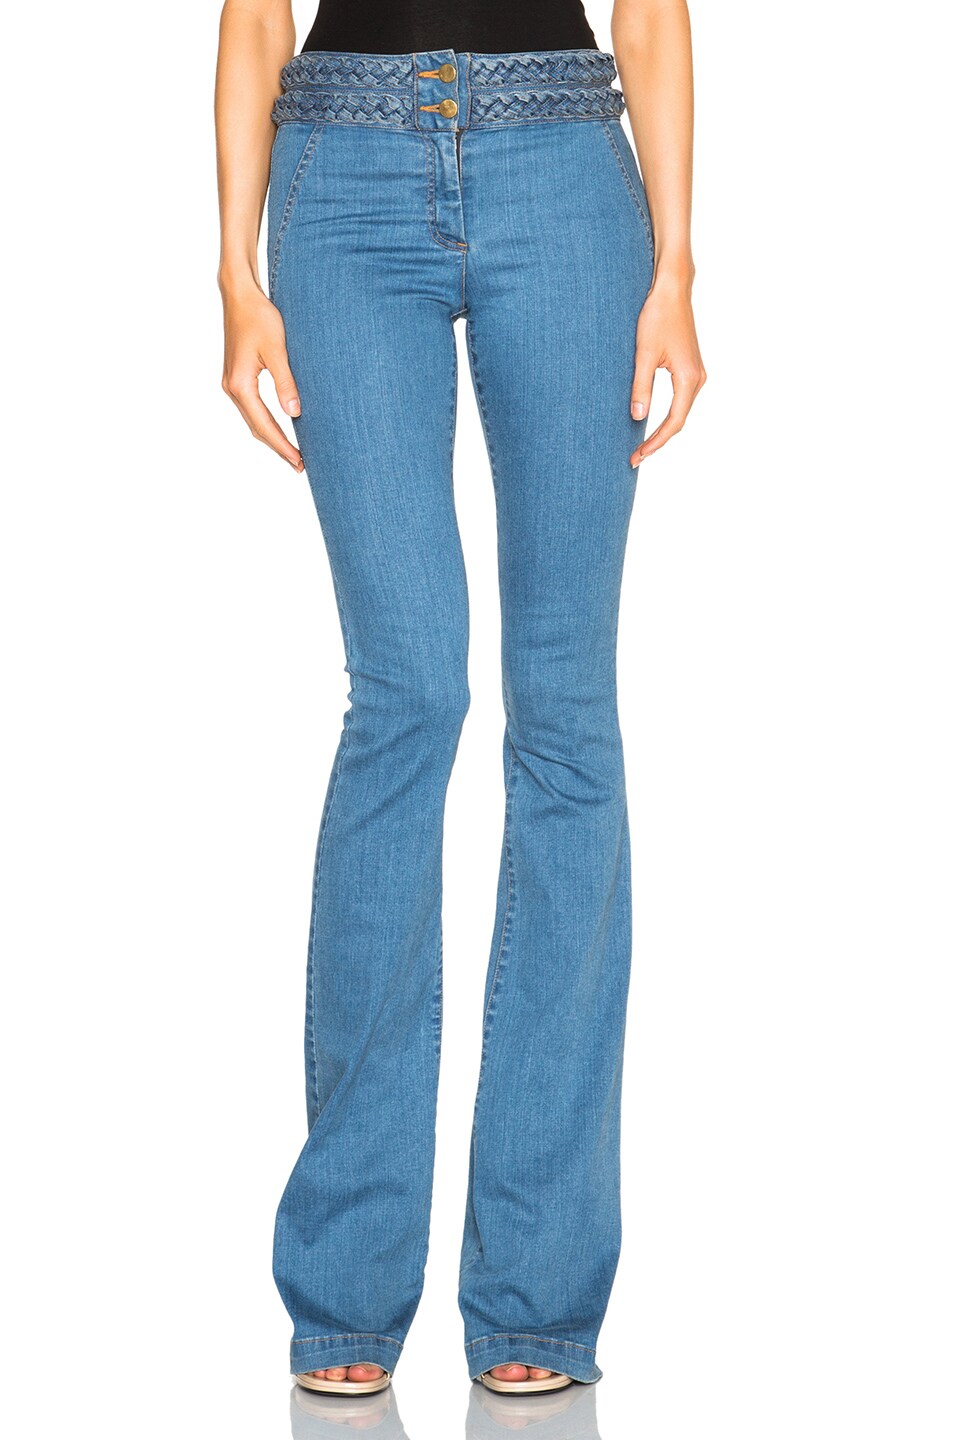 Image 1 of Veronica Beard Biscayne Braided High Waisted Jeans in Retro Blue